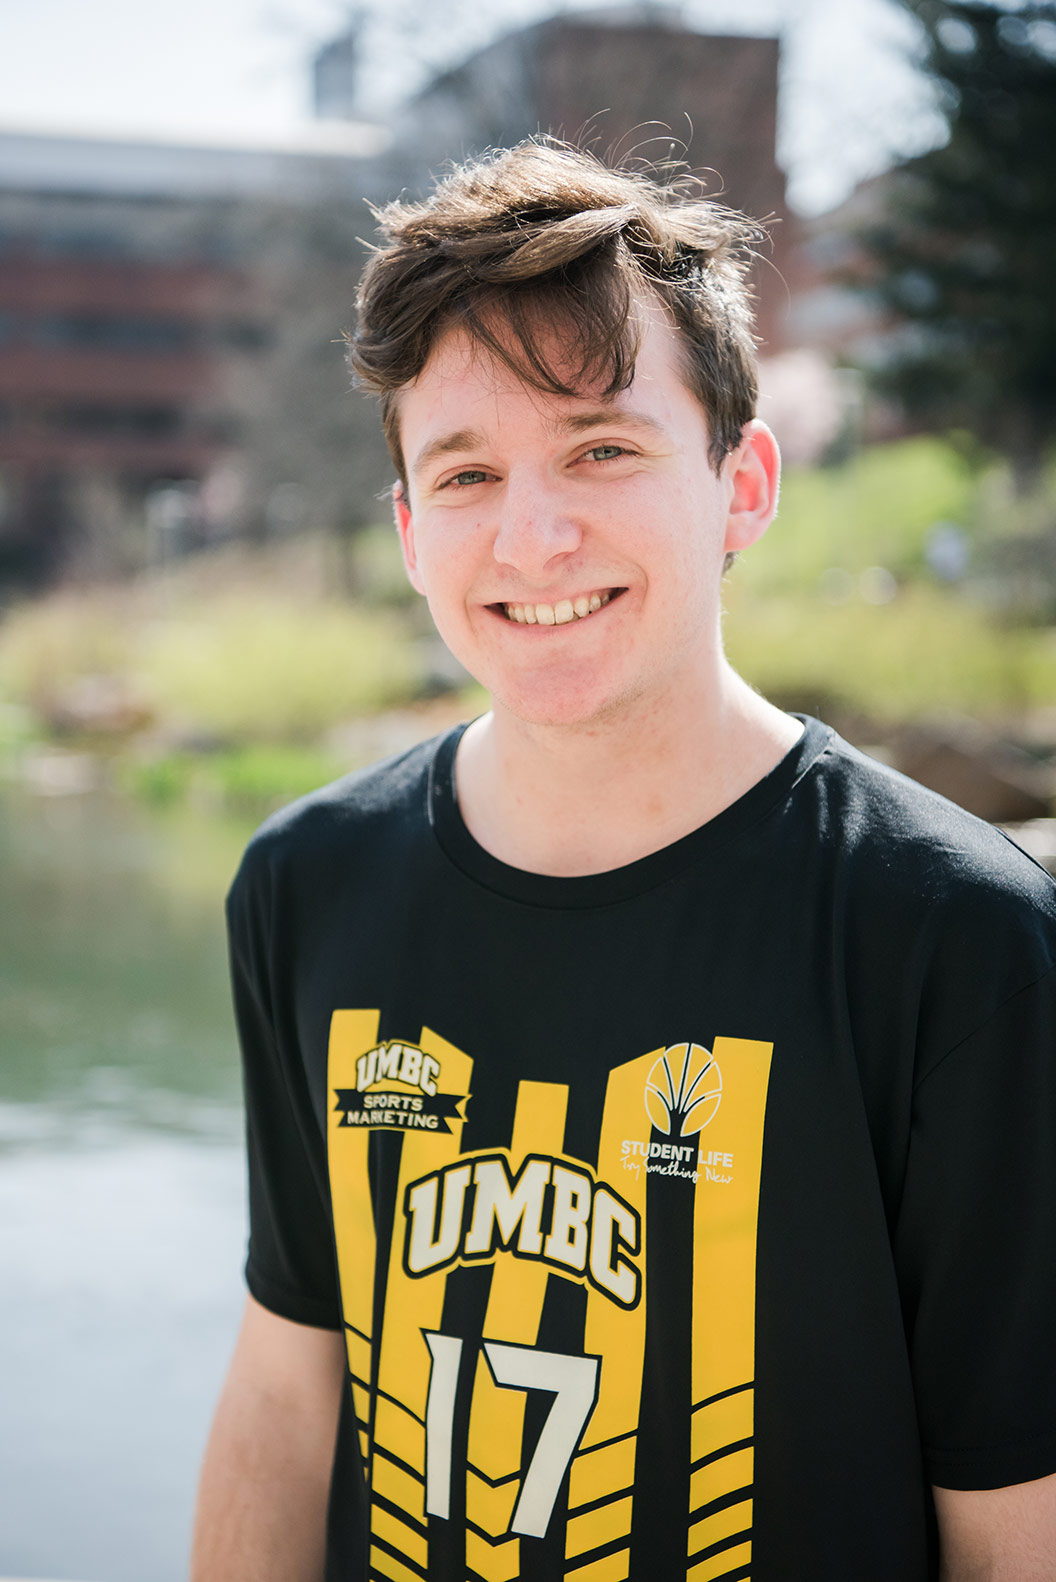 Jake, a smiling student in UMBC shirt.